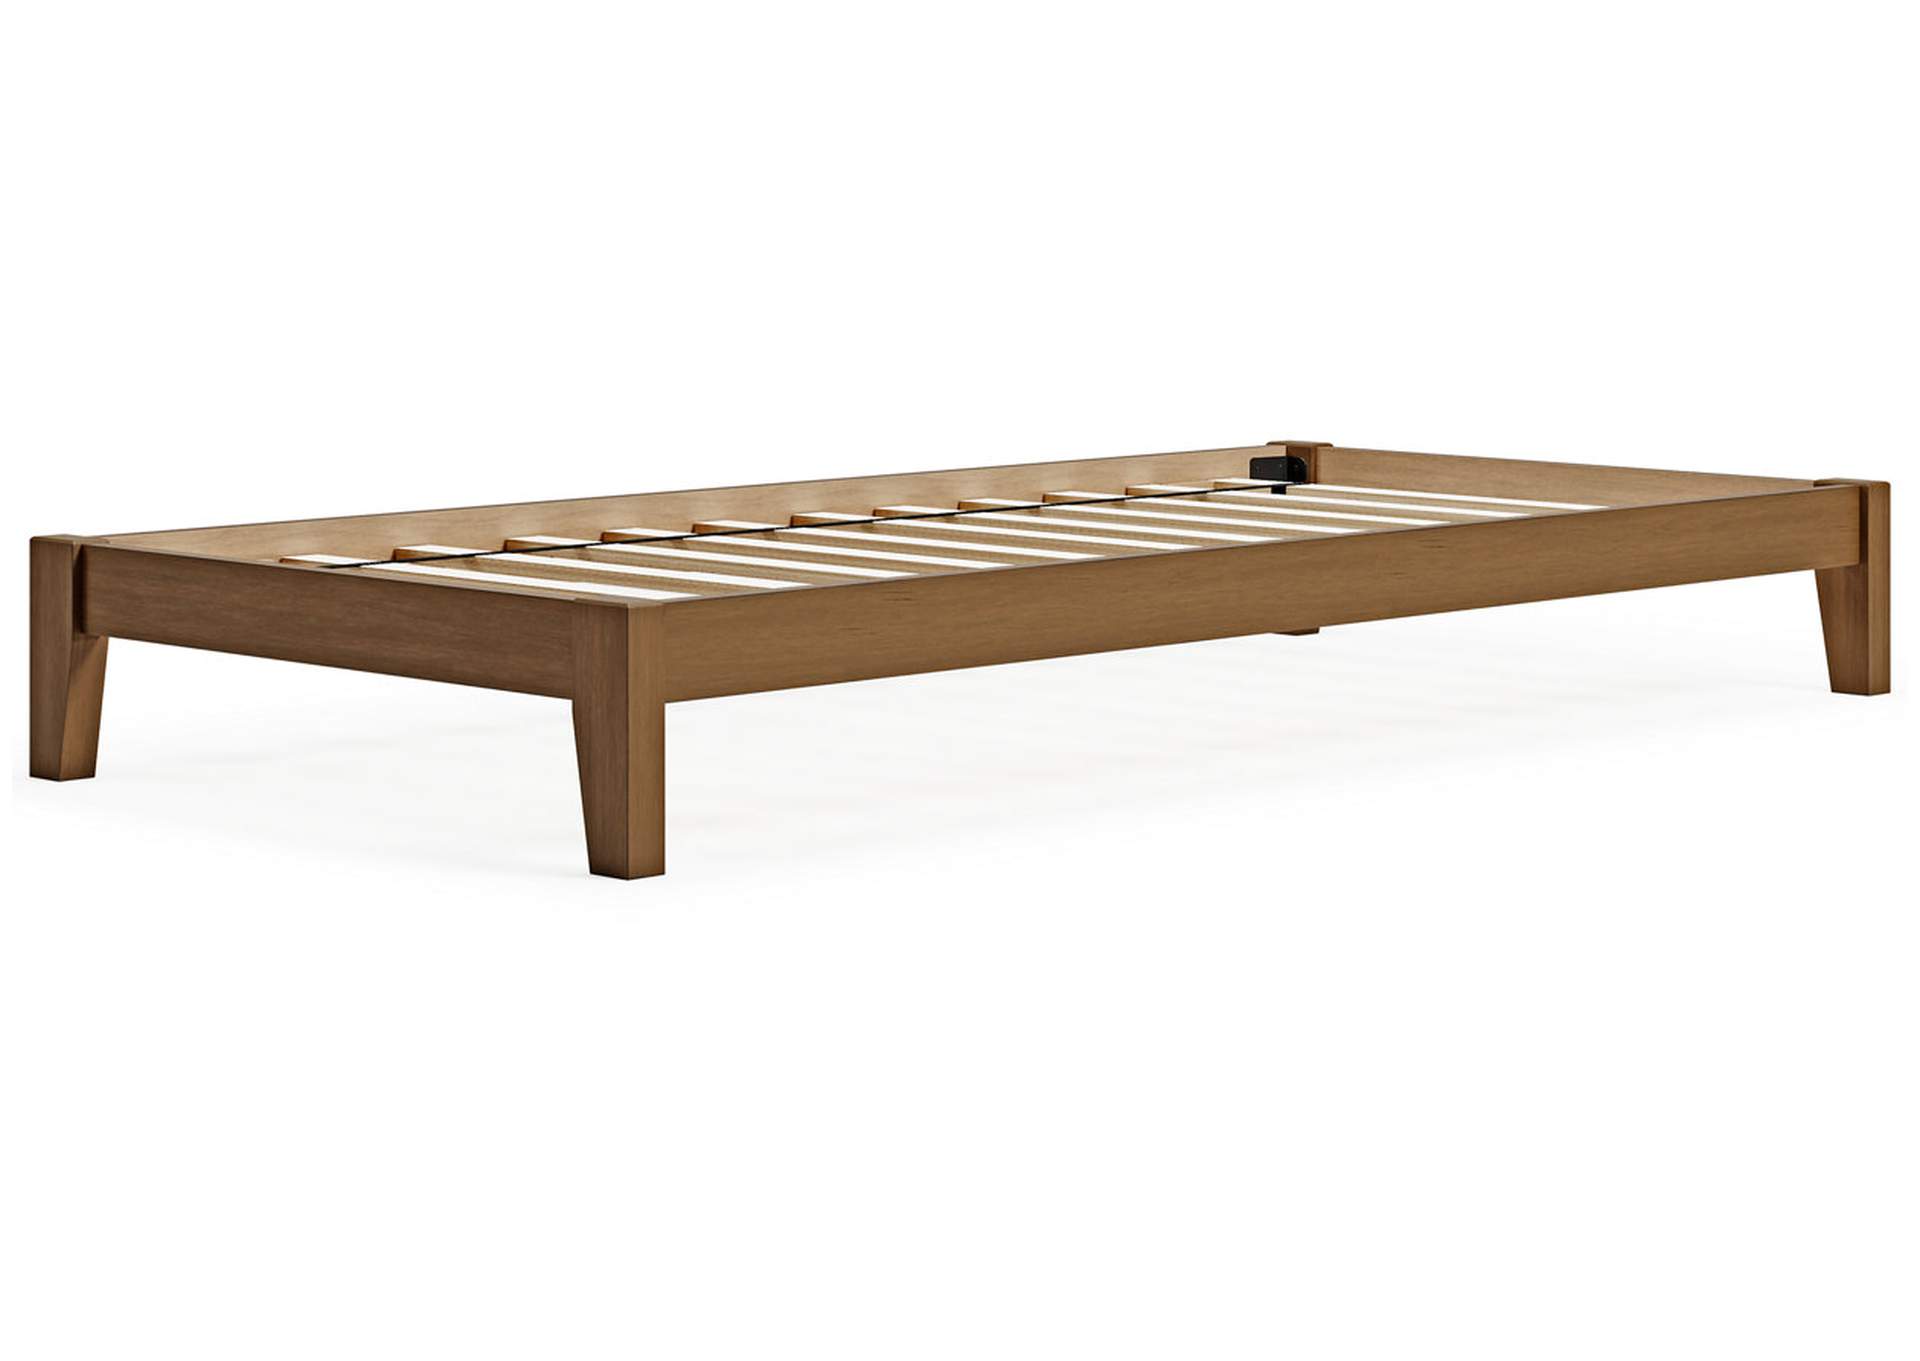 Tannally Twin Platform Bed,Direct To Consumer Express